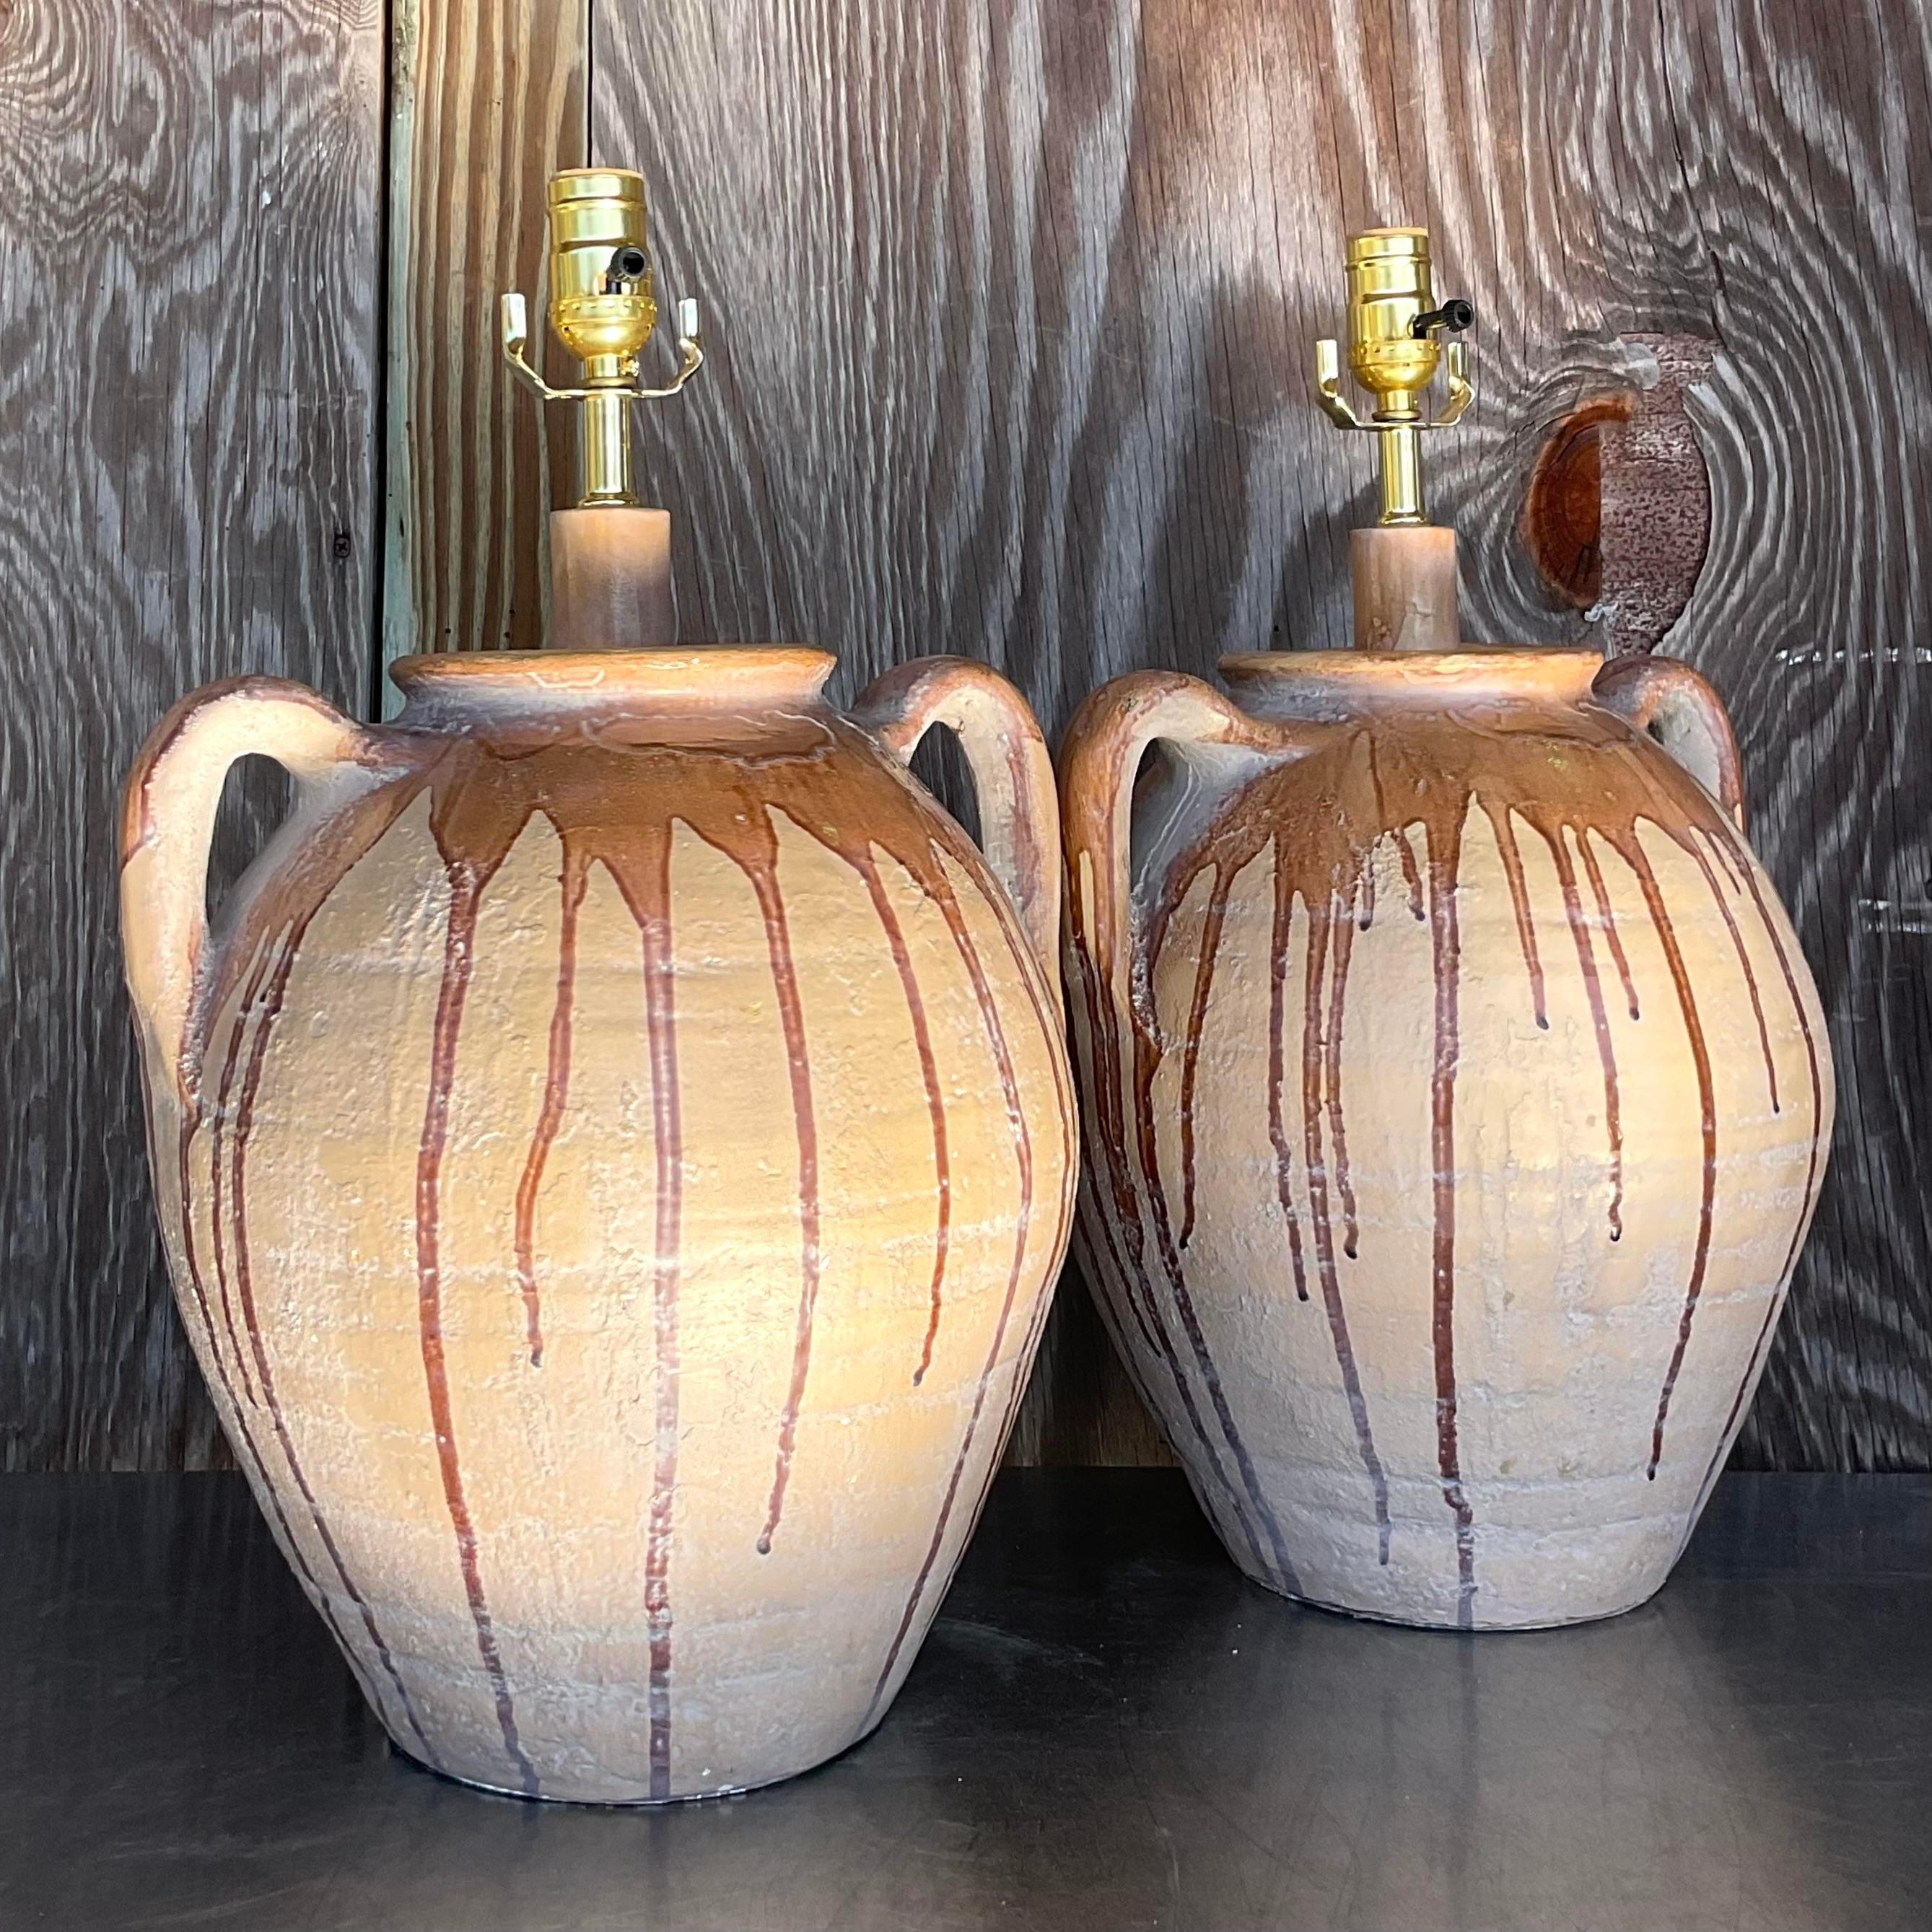 A fabulous pair of vintage Boho table lamps. A chic matte finish with a fab drip glaze. Warm neutral colors. Fully restored with all new wiring and hardware. Acquired from a Palm Beach estate.